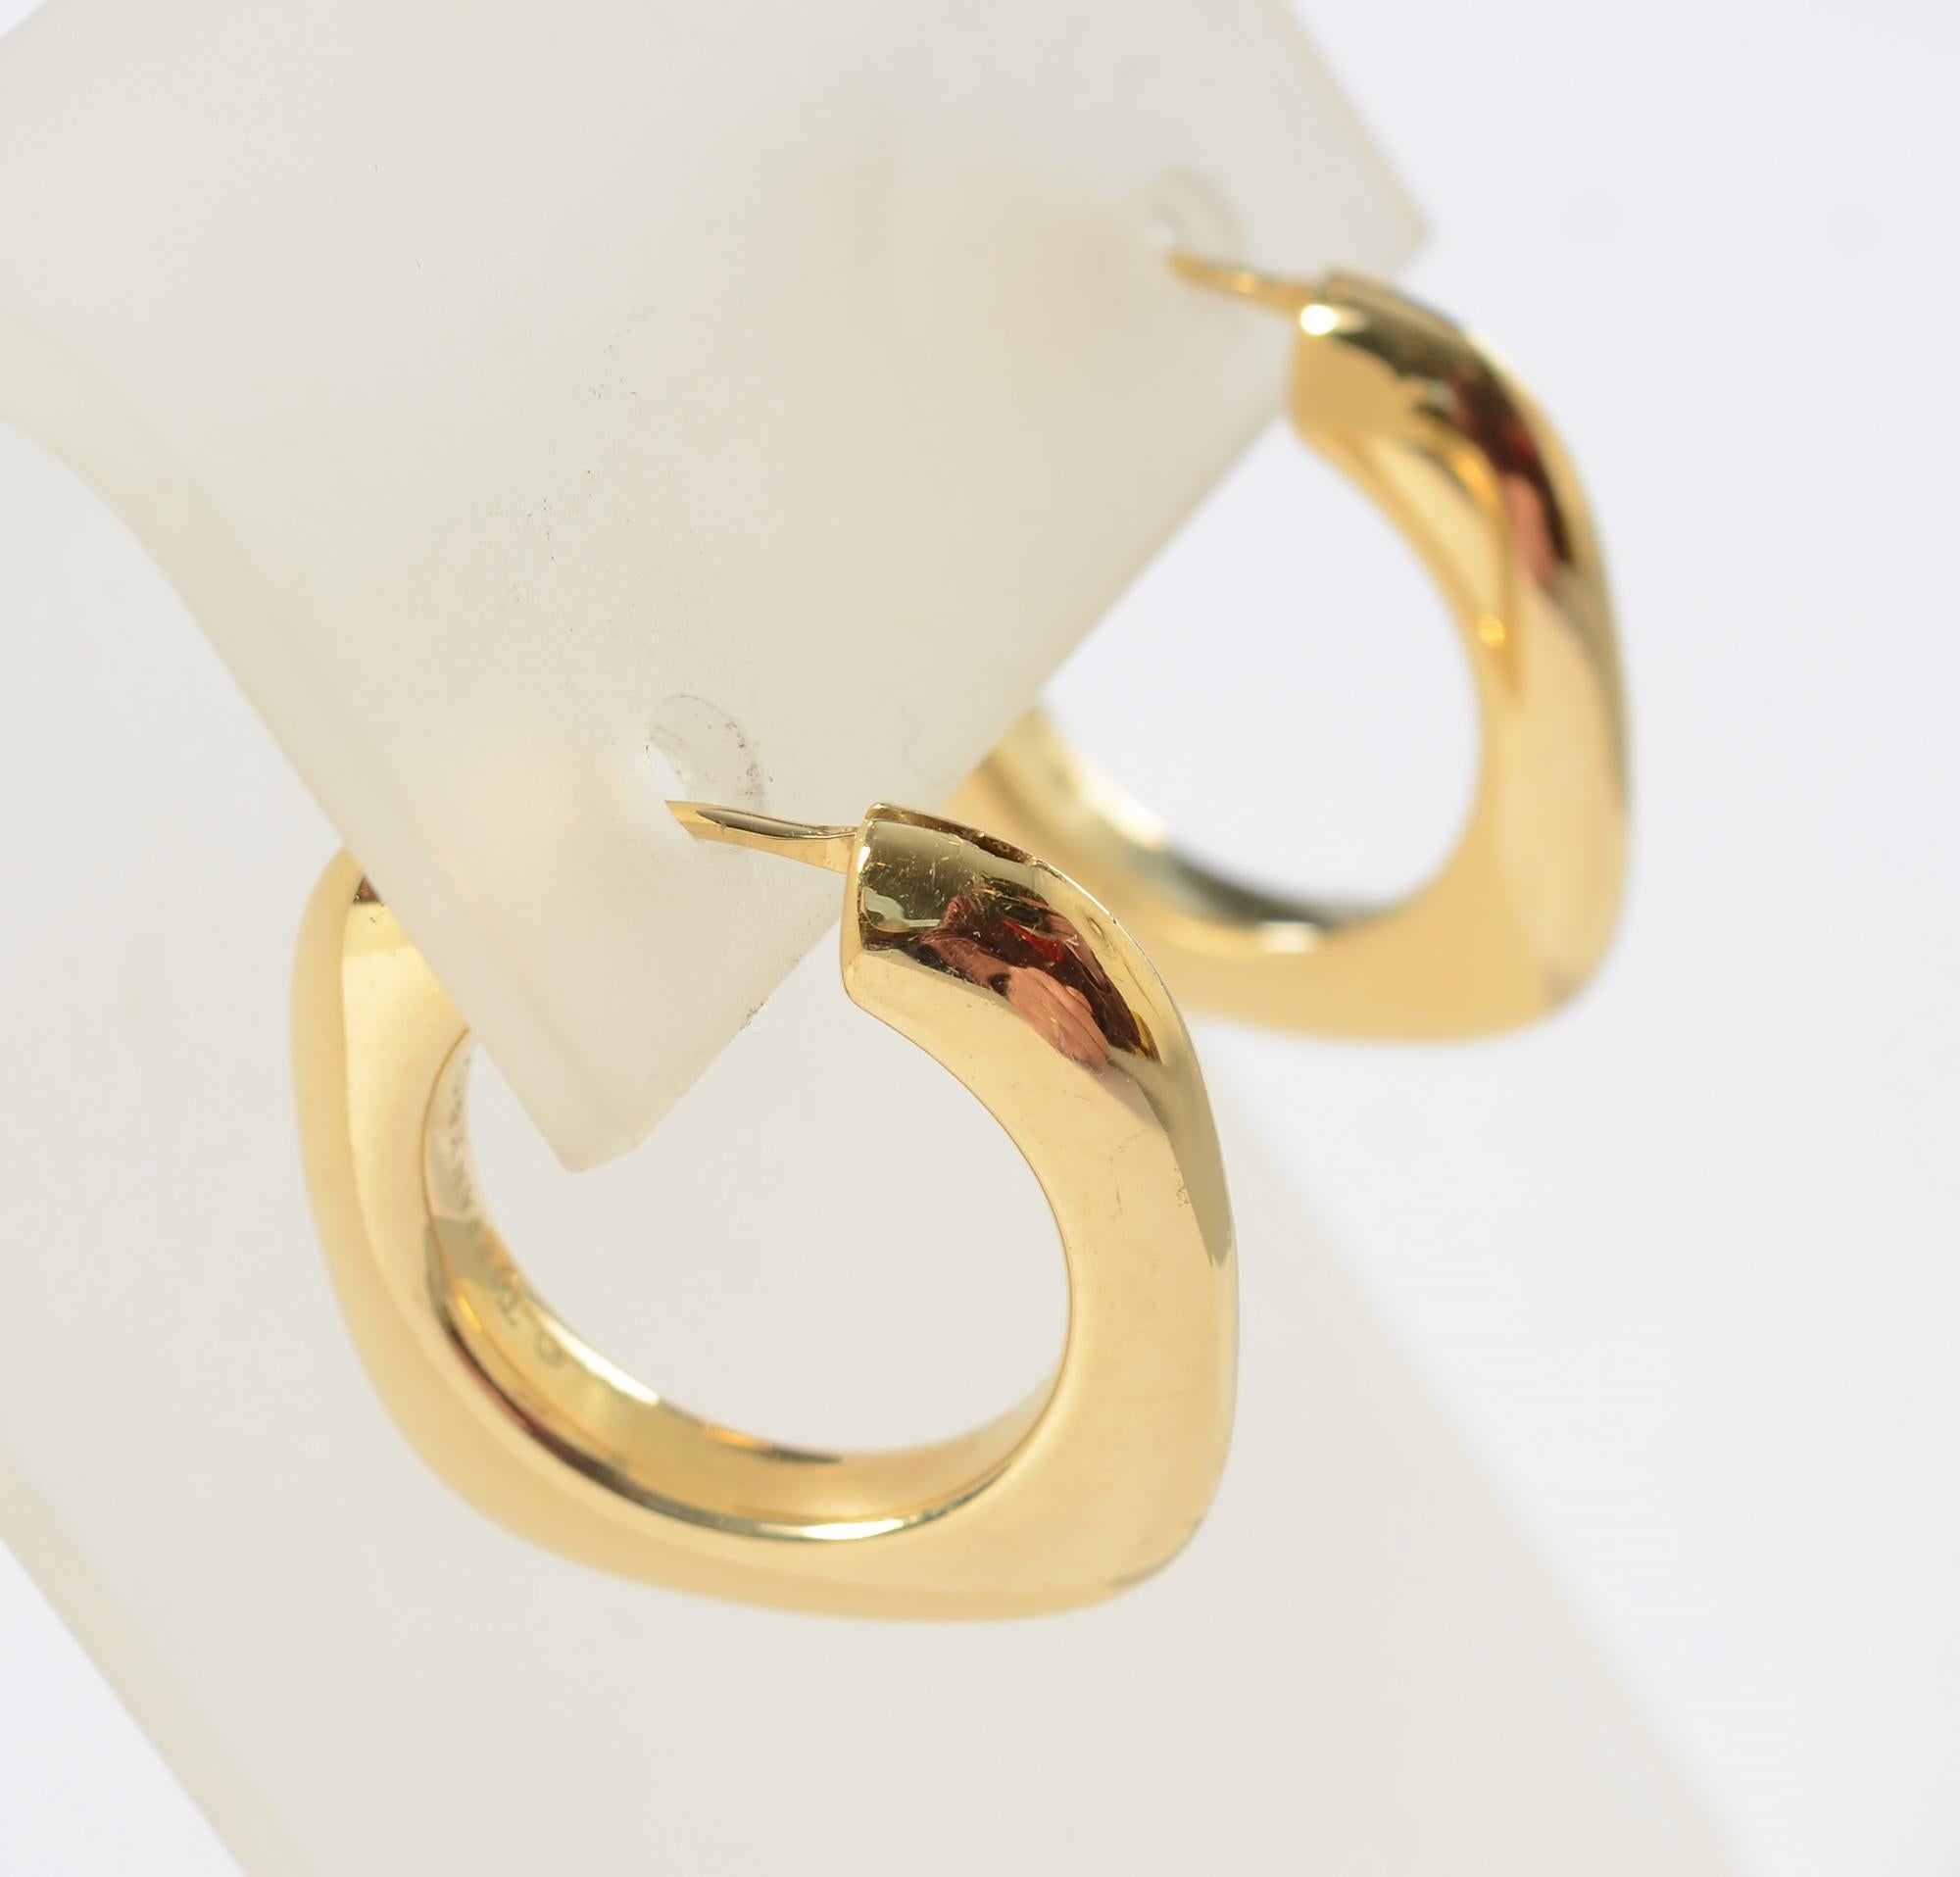 Square hoop earrings by Tiffany in 18 karat gold. The square exterior has rounded corners and a circular interior. The earrings match Modernist Tiffany bracelet listed as item LU13312181932.
The earrings have posts for pierced ears. 